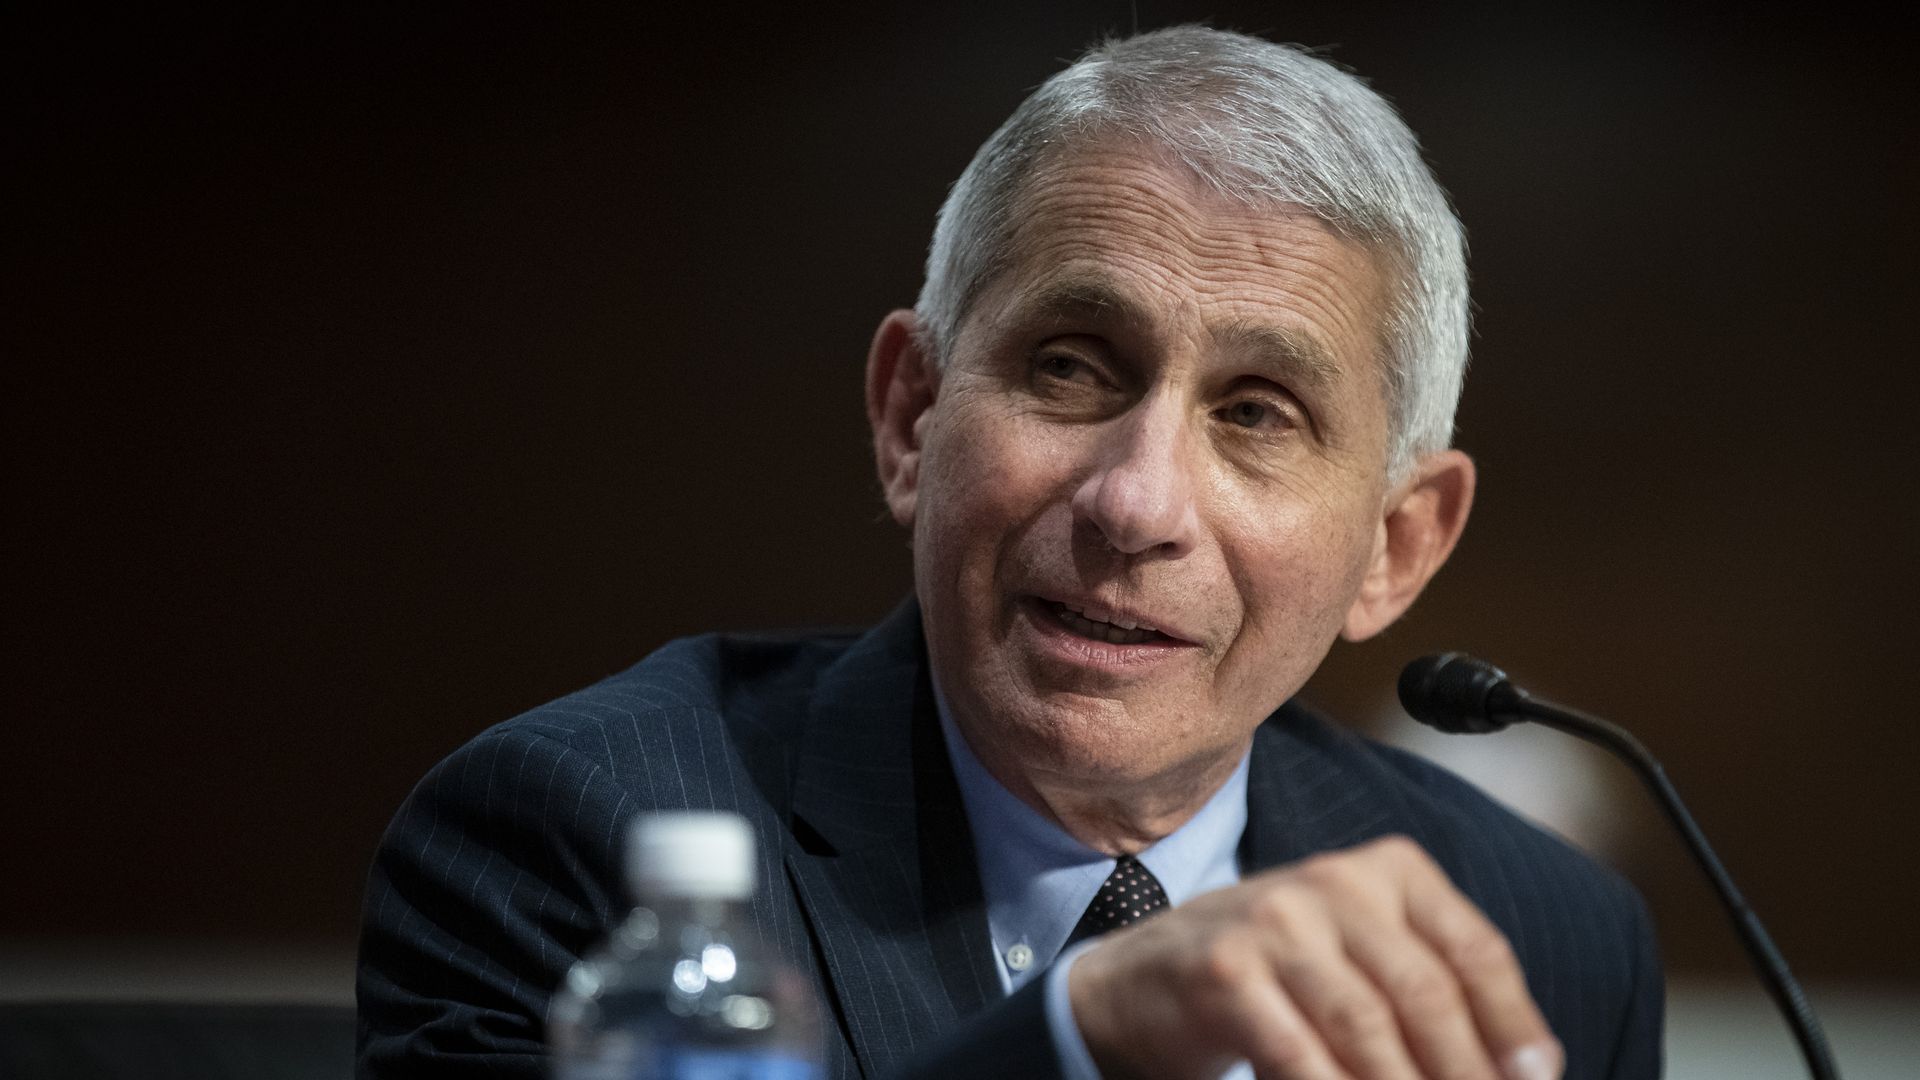 Anthony Fauci, director of the NIAID, speaks during a Senate Health, Education, Labor and Pensions Committee hearing on June 30, 2020 in Washington, DC. 